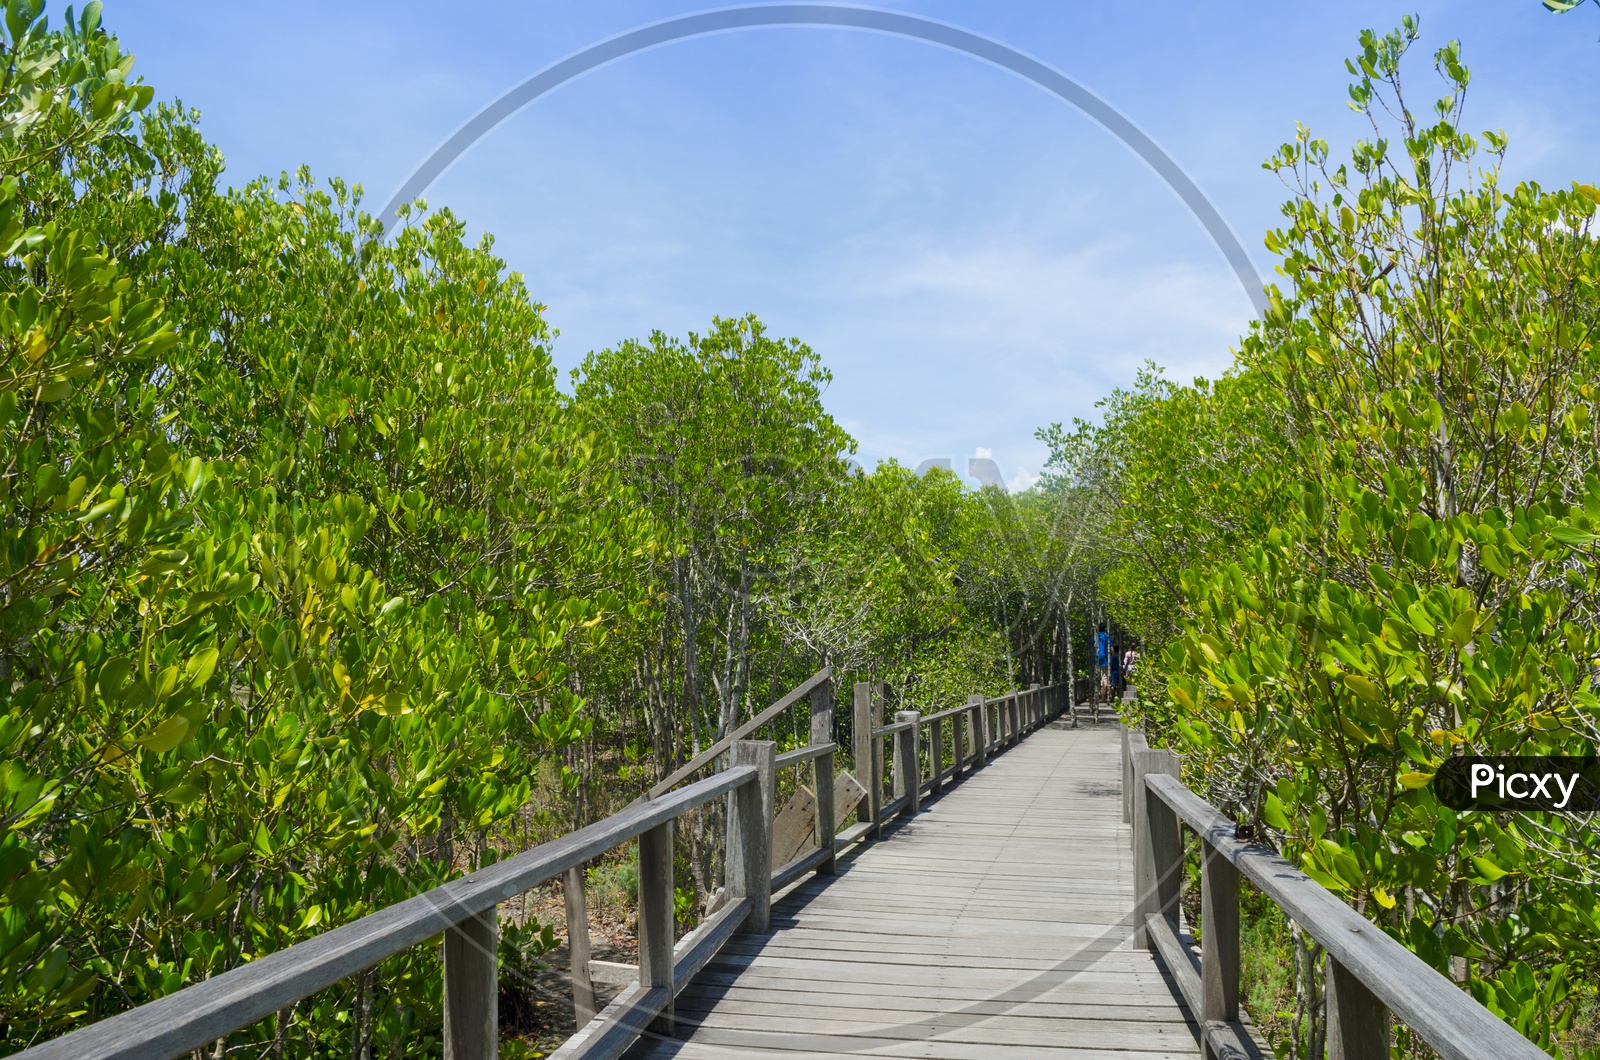 Wood path way among the Mangrove forest